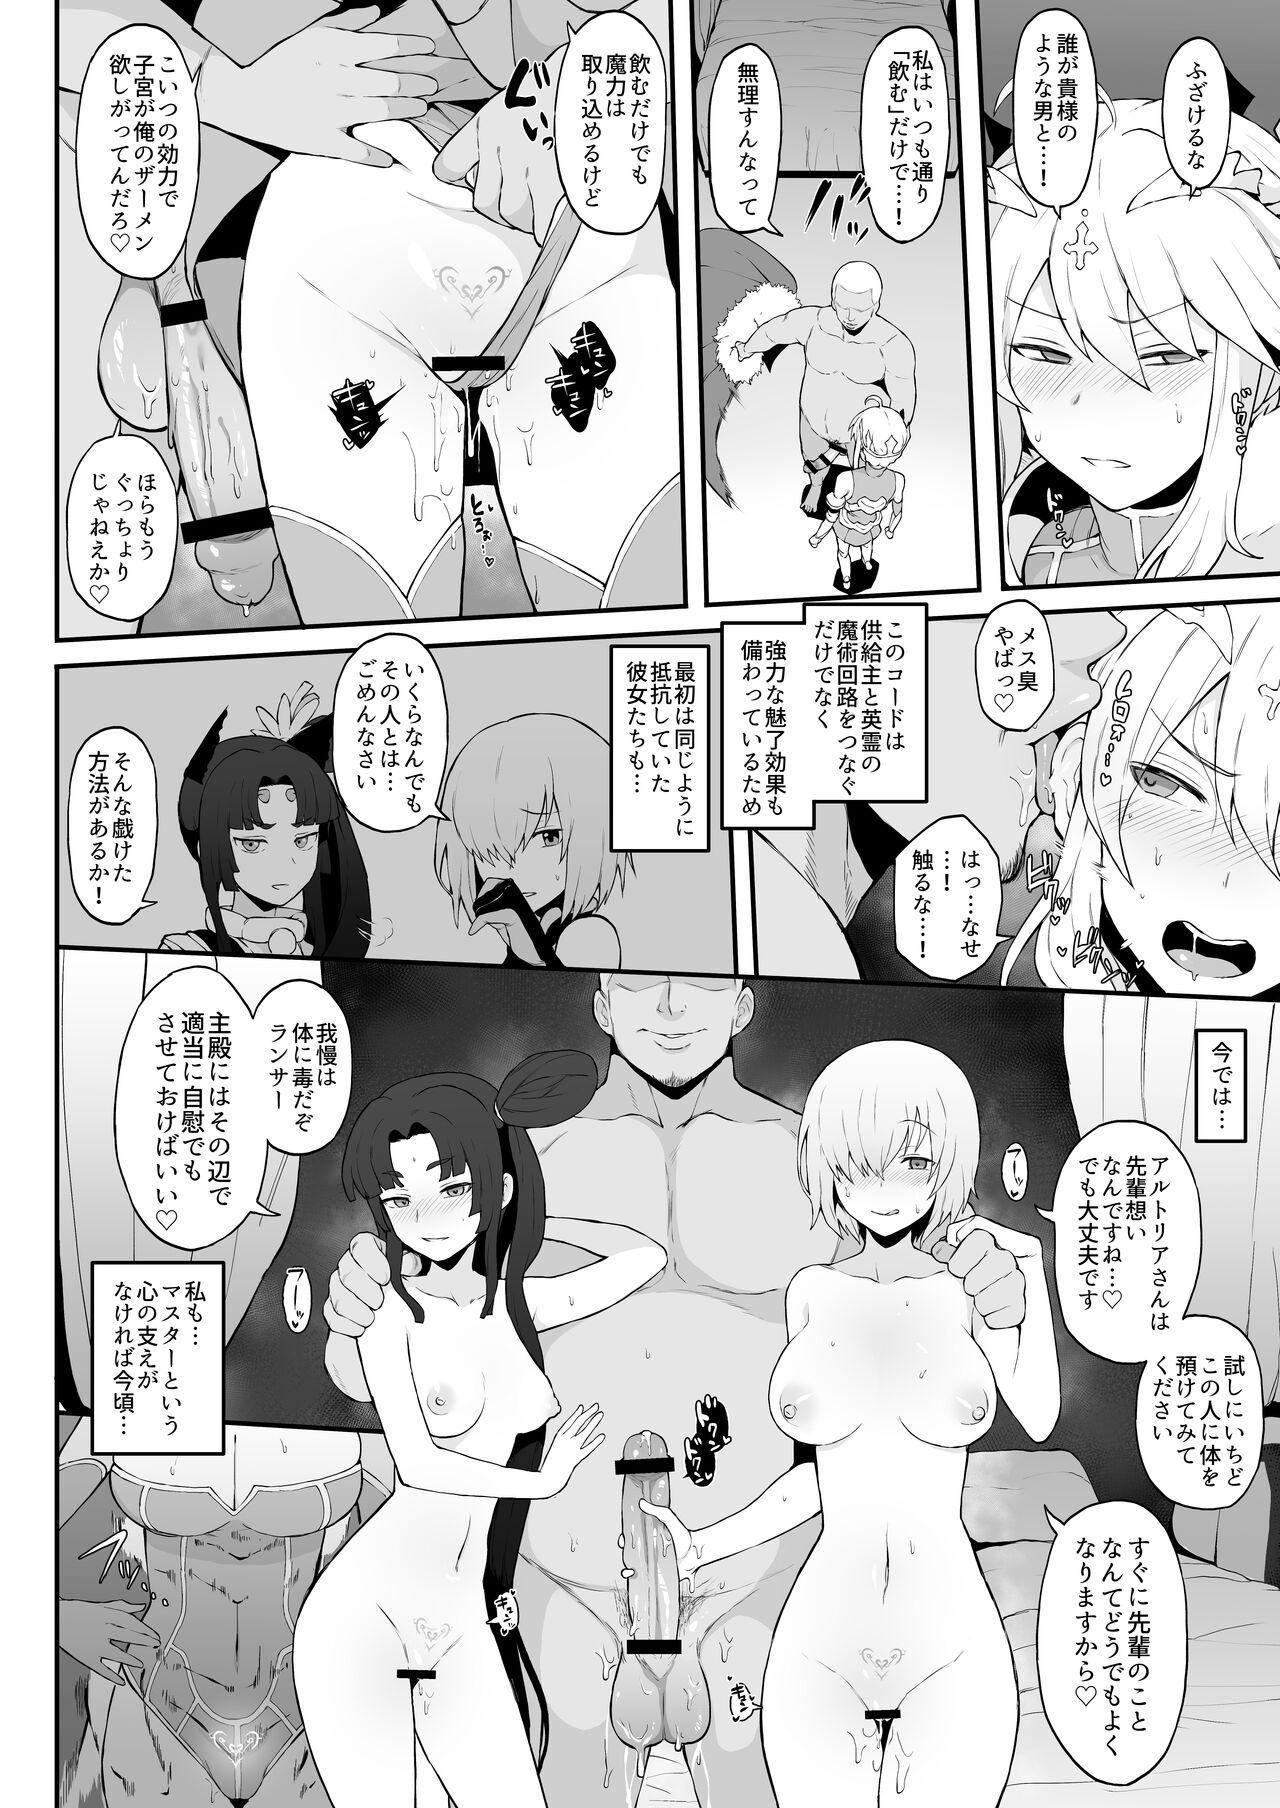 Gay Hunks No Title - Fate grand order Load - Page 6